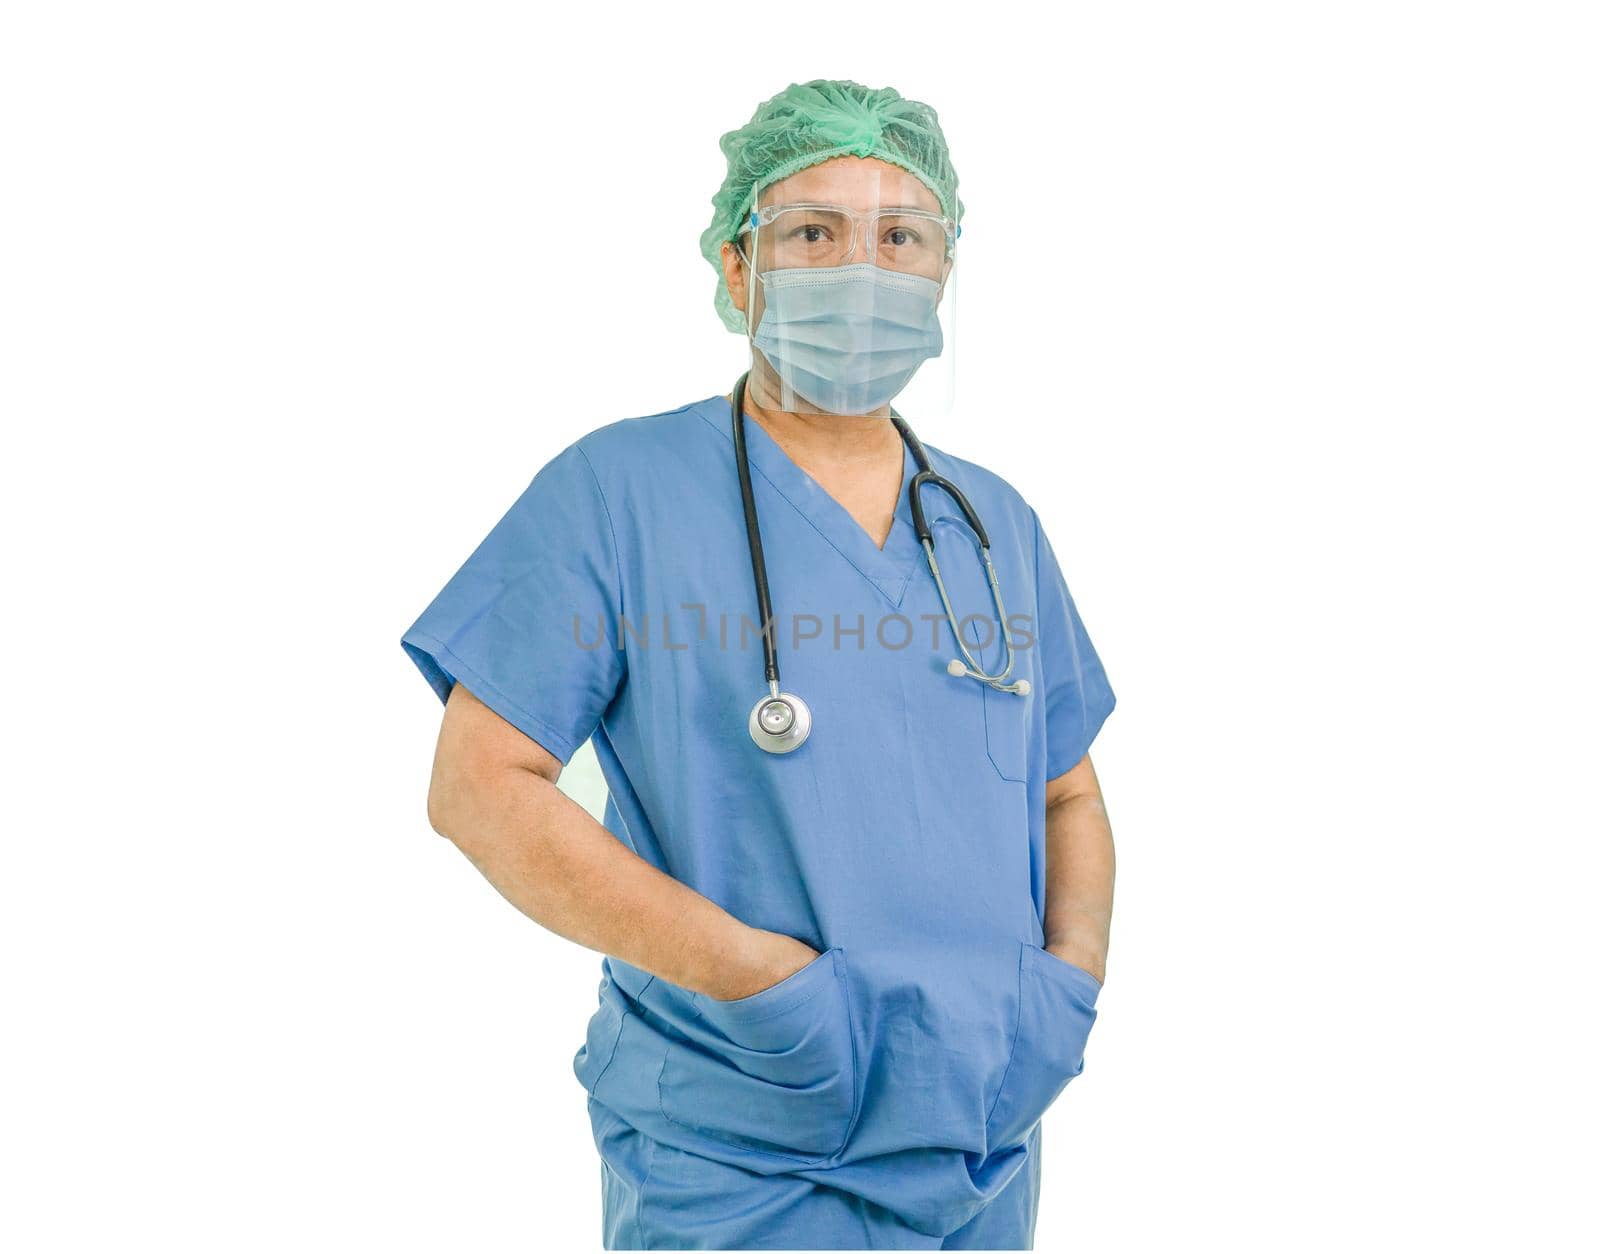 Asian doctor wearing face shield and PPE suit new normal to check patient protect safety infection Covid-19 Coronavirus isolated on white background with clipping path.